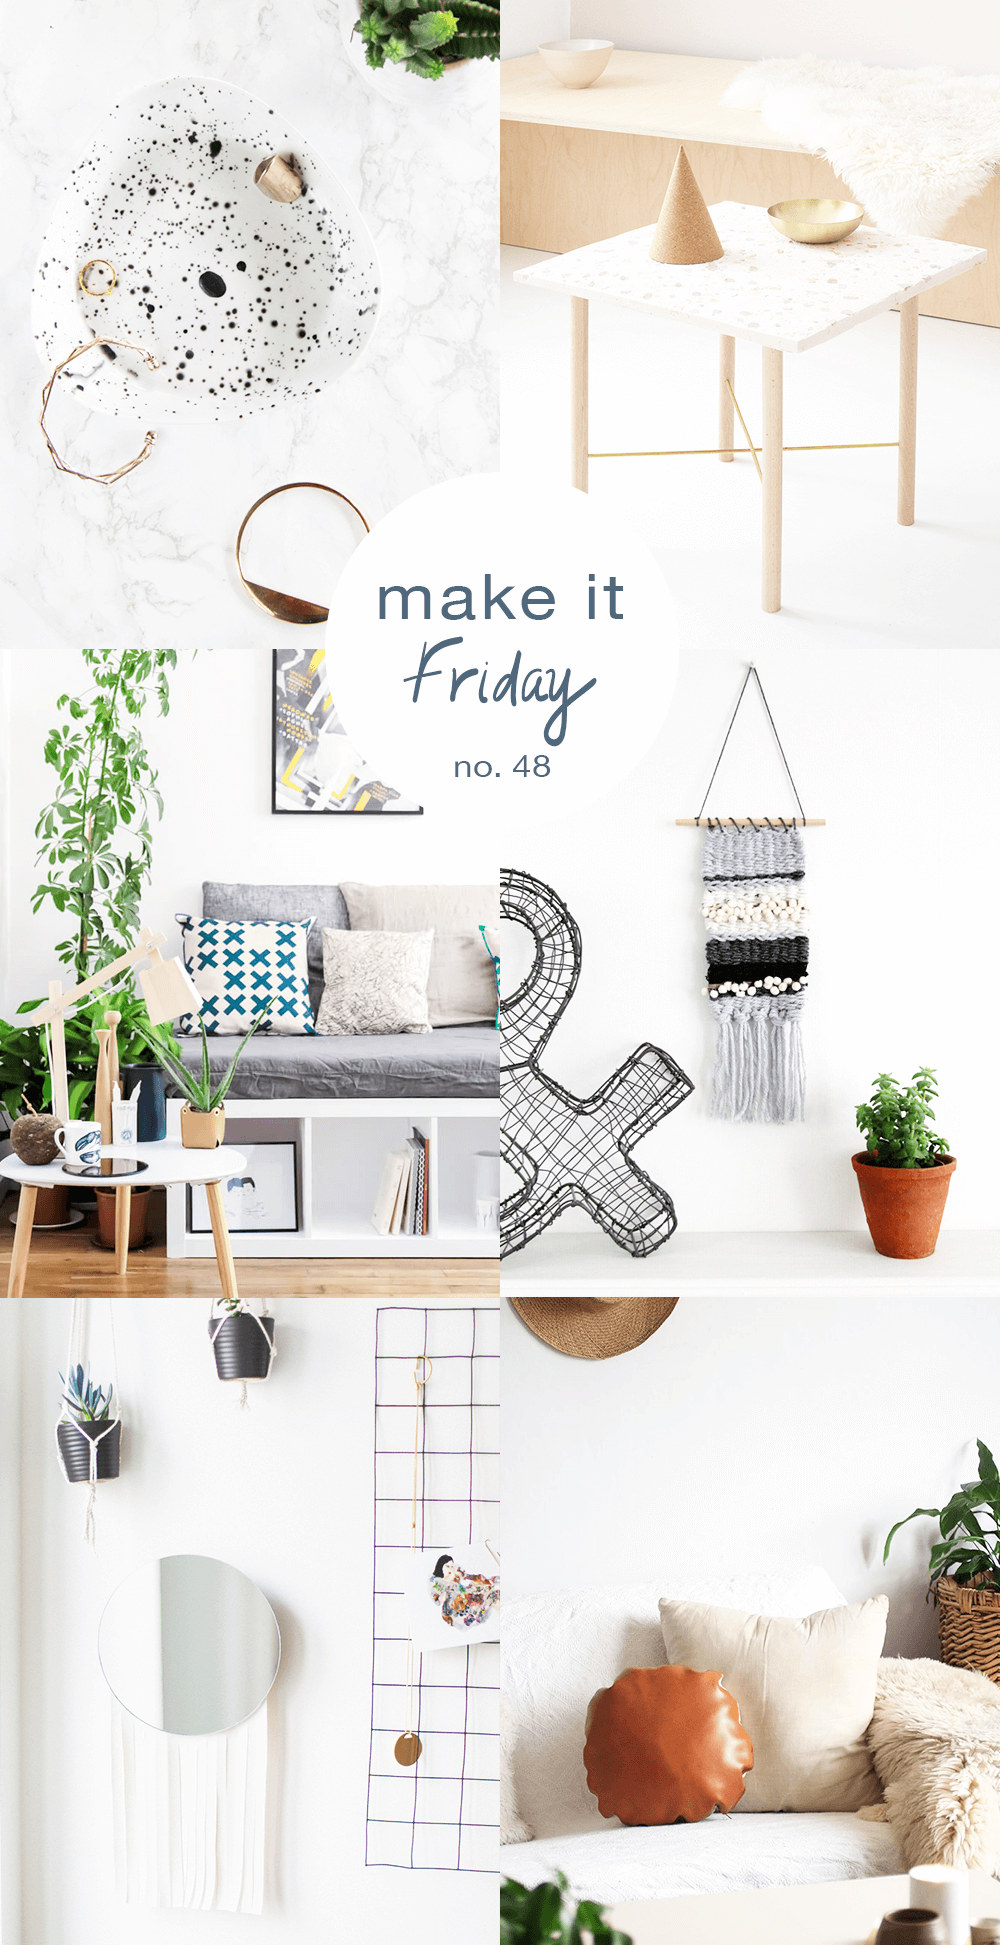 Make it Friday - DIY ideas to inspire your weekend